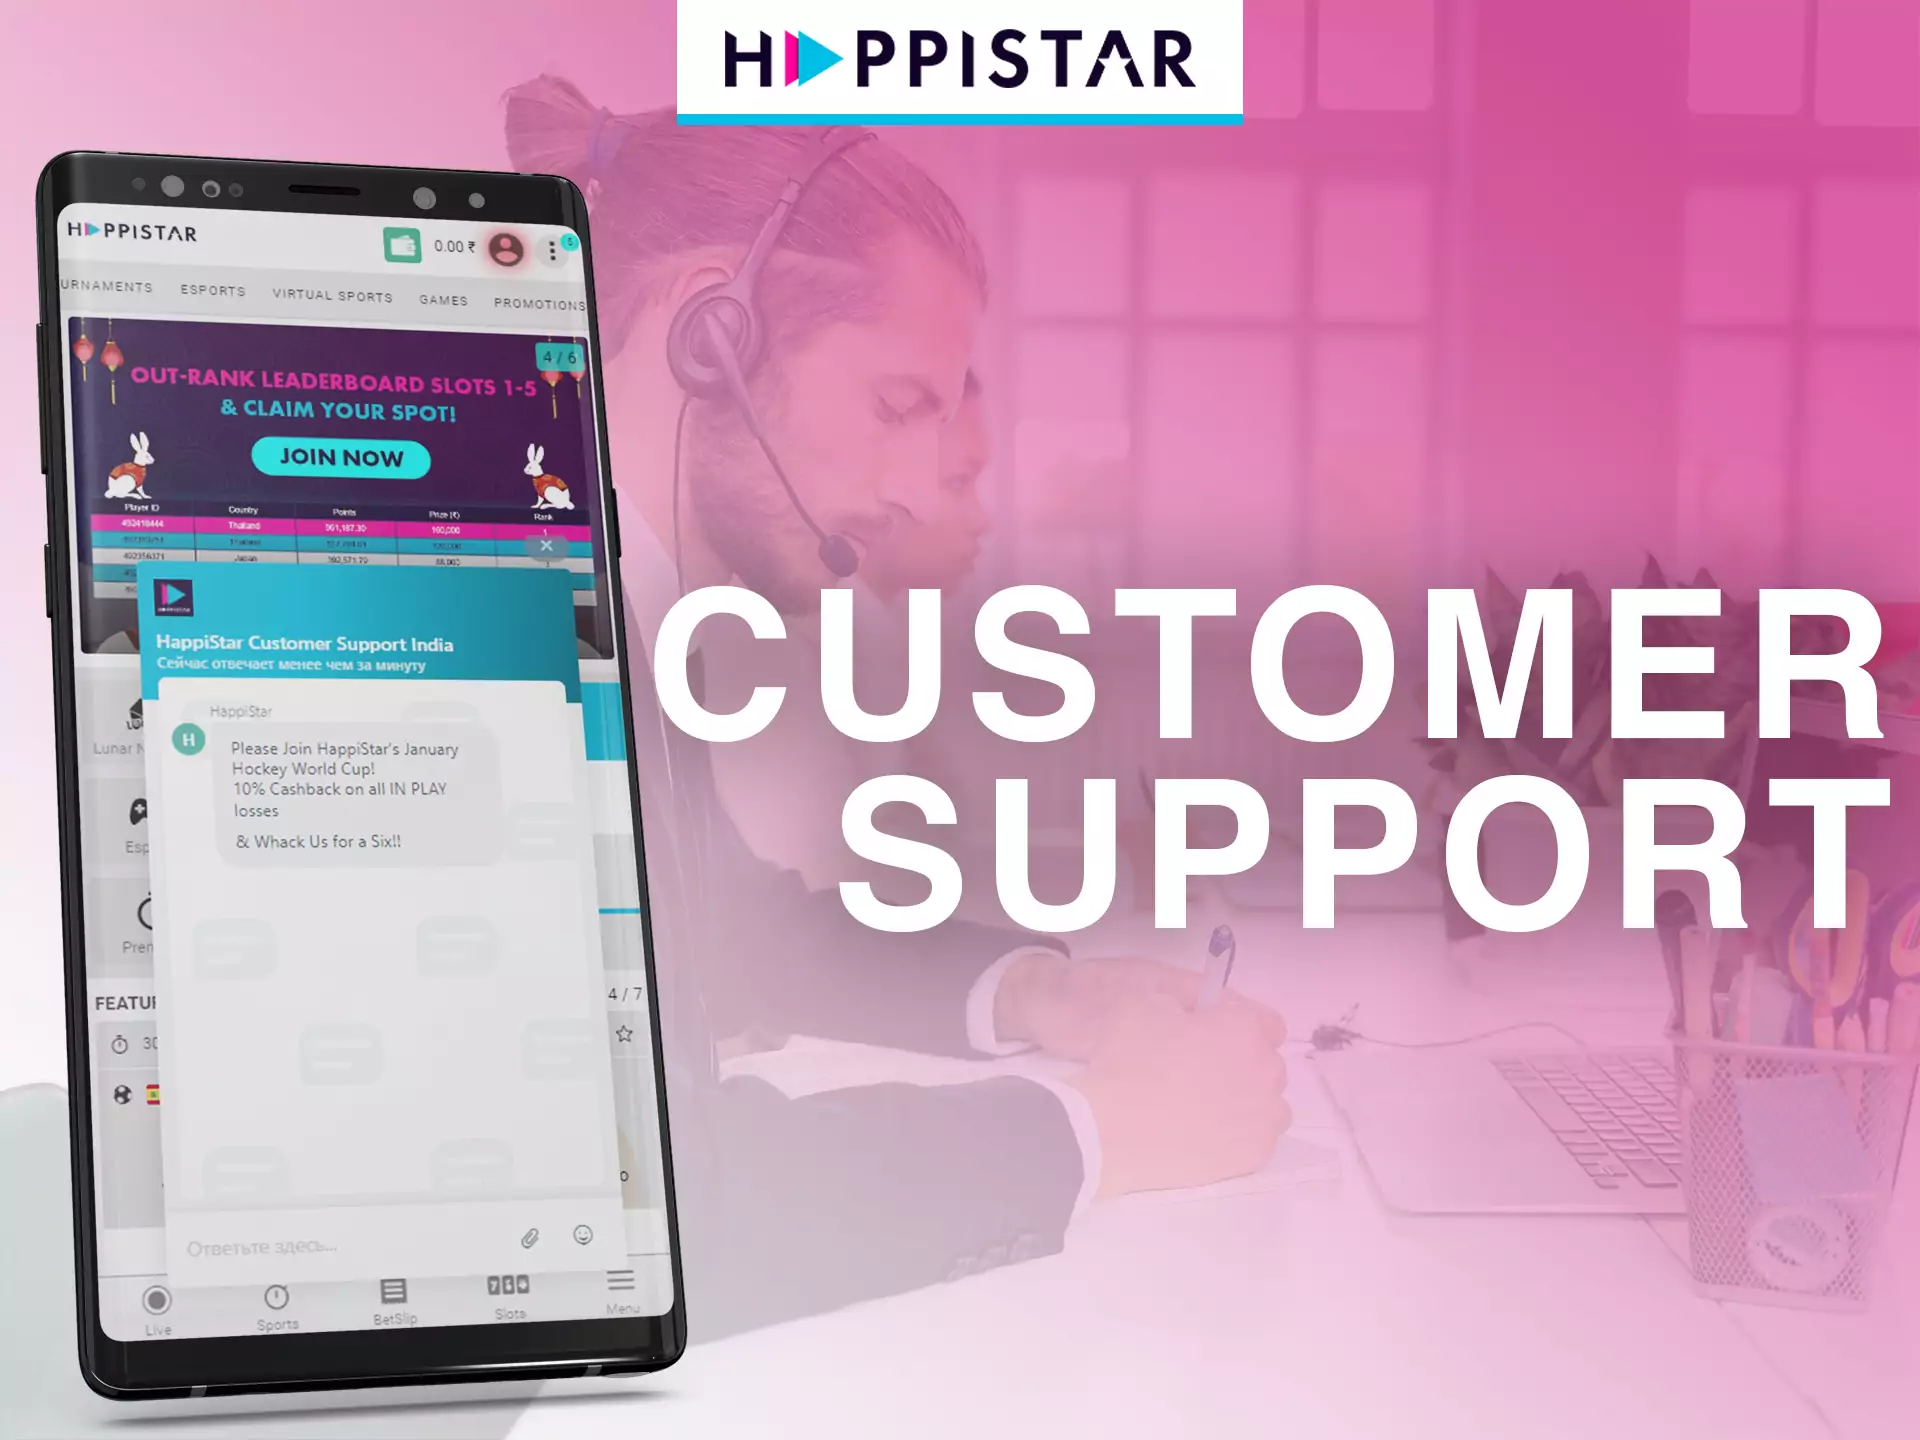 Ask a manager in an online chat if you have questions about Happistar.